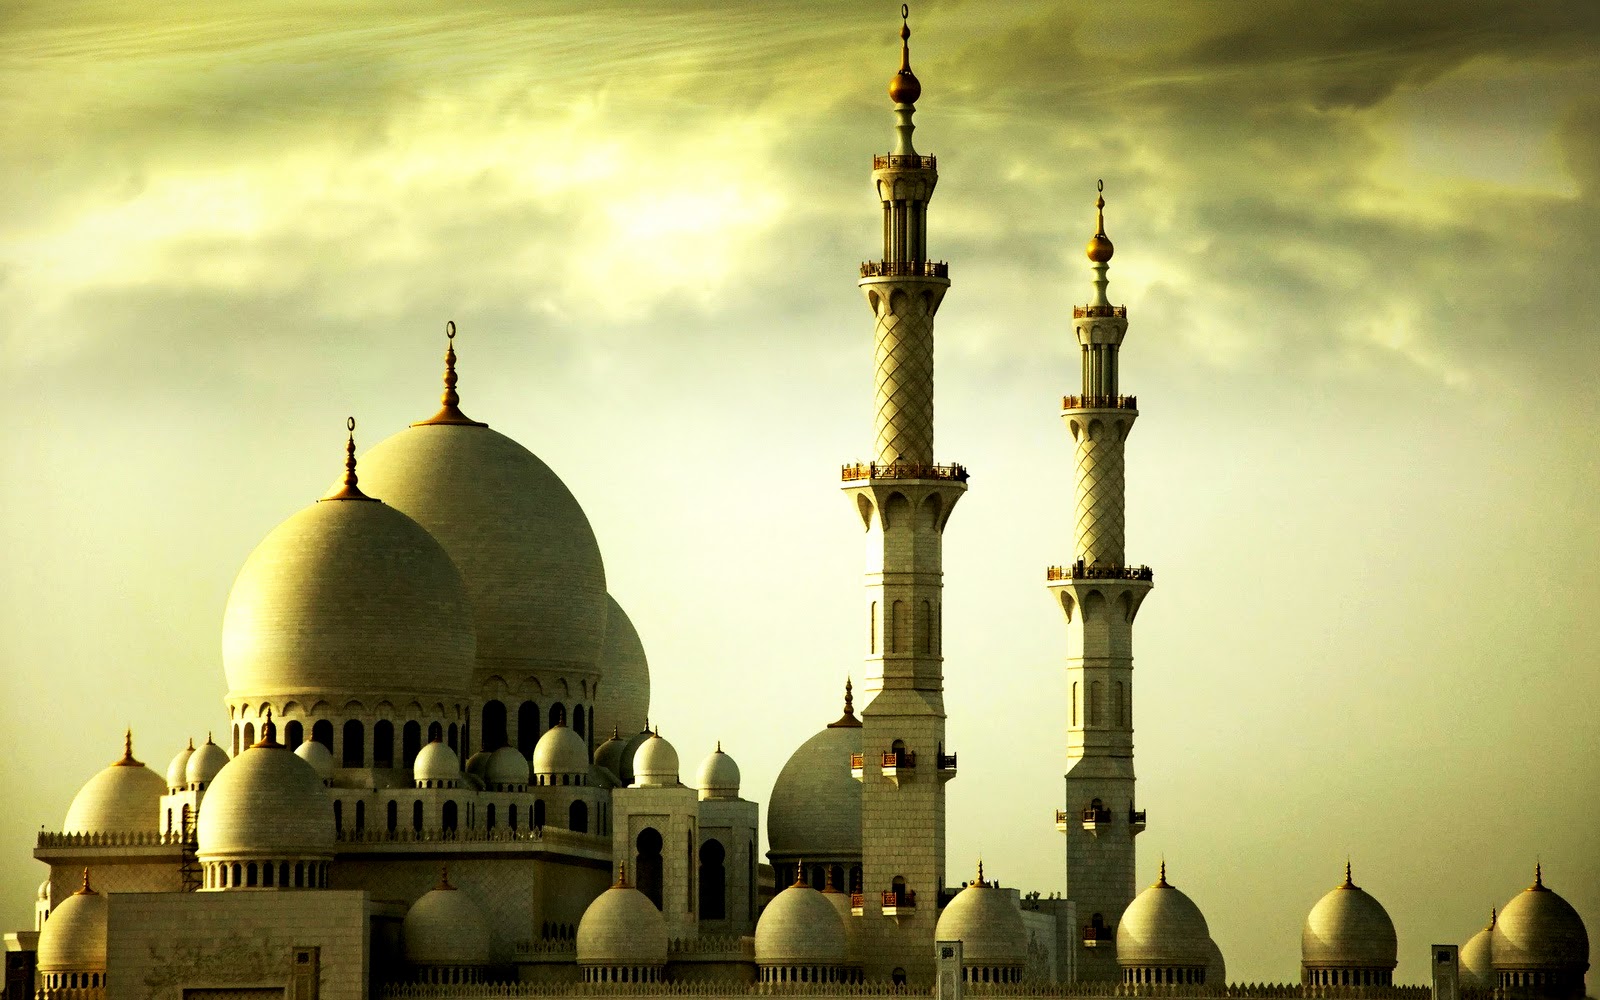 New Mosques Background Image